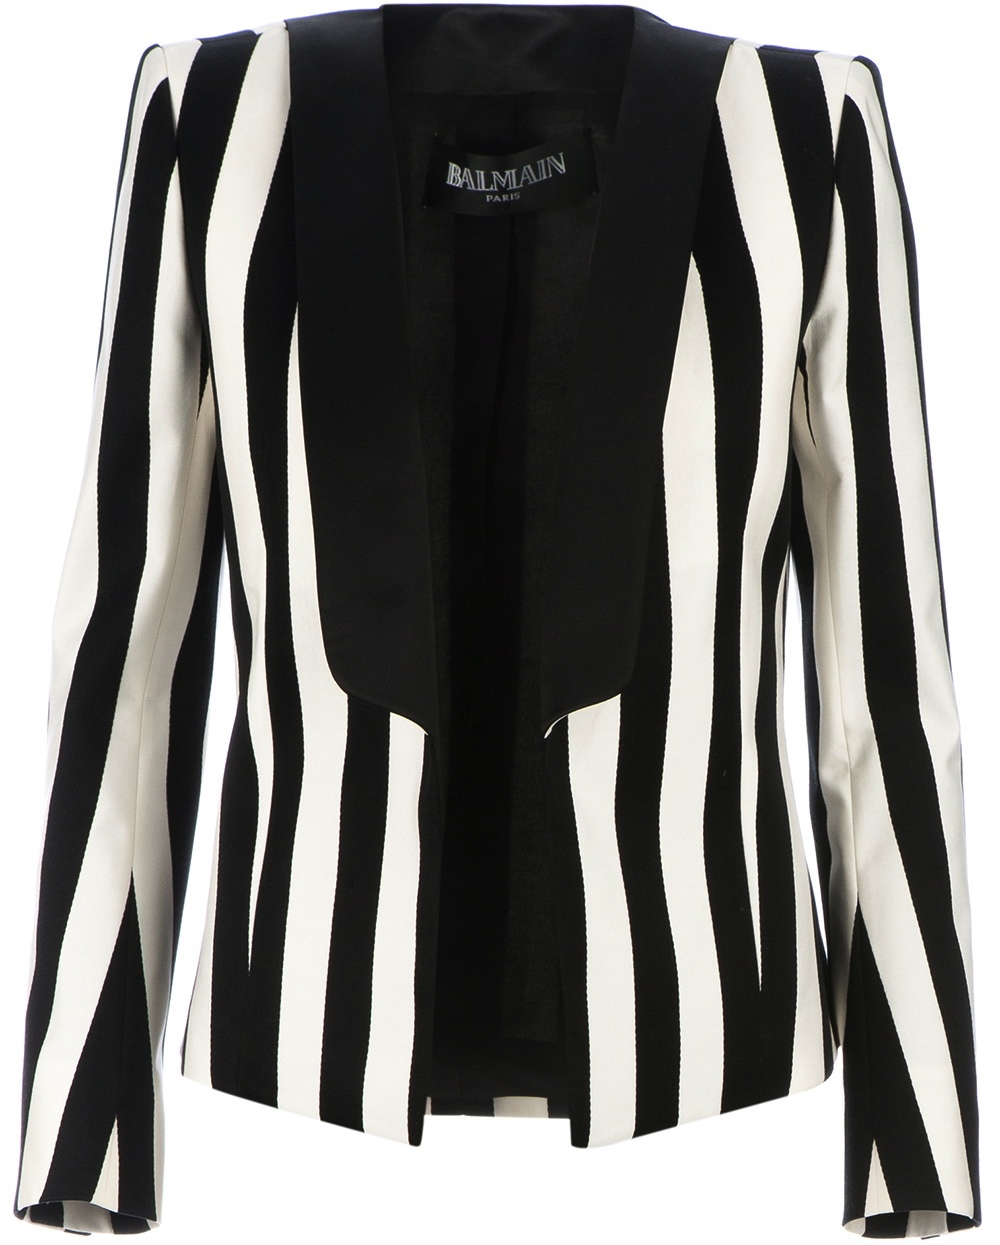 Obsession of the week - Black and White Striped Blazer | Josephina ...